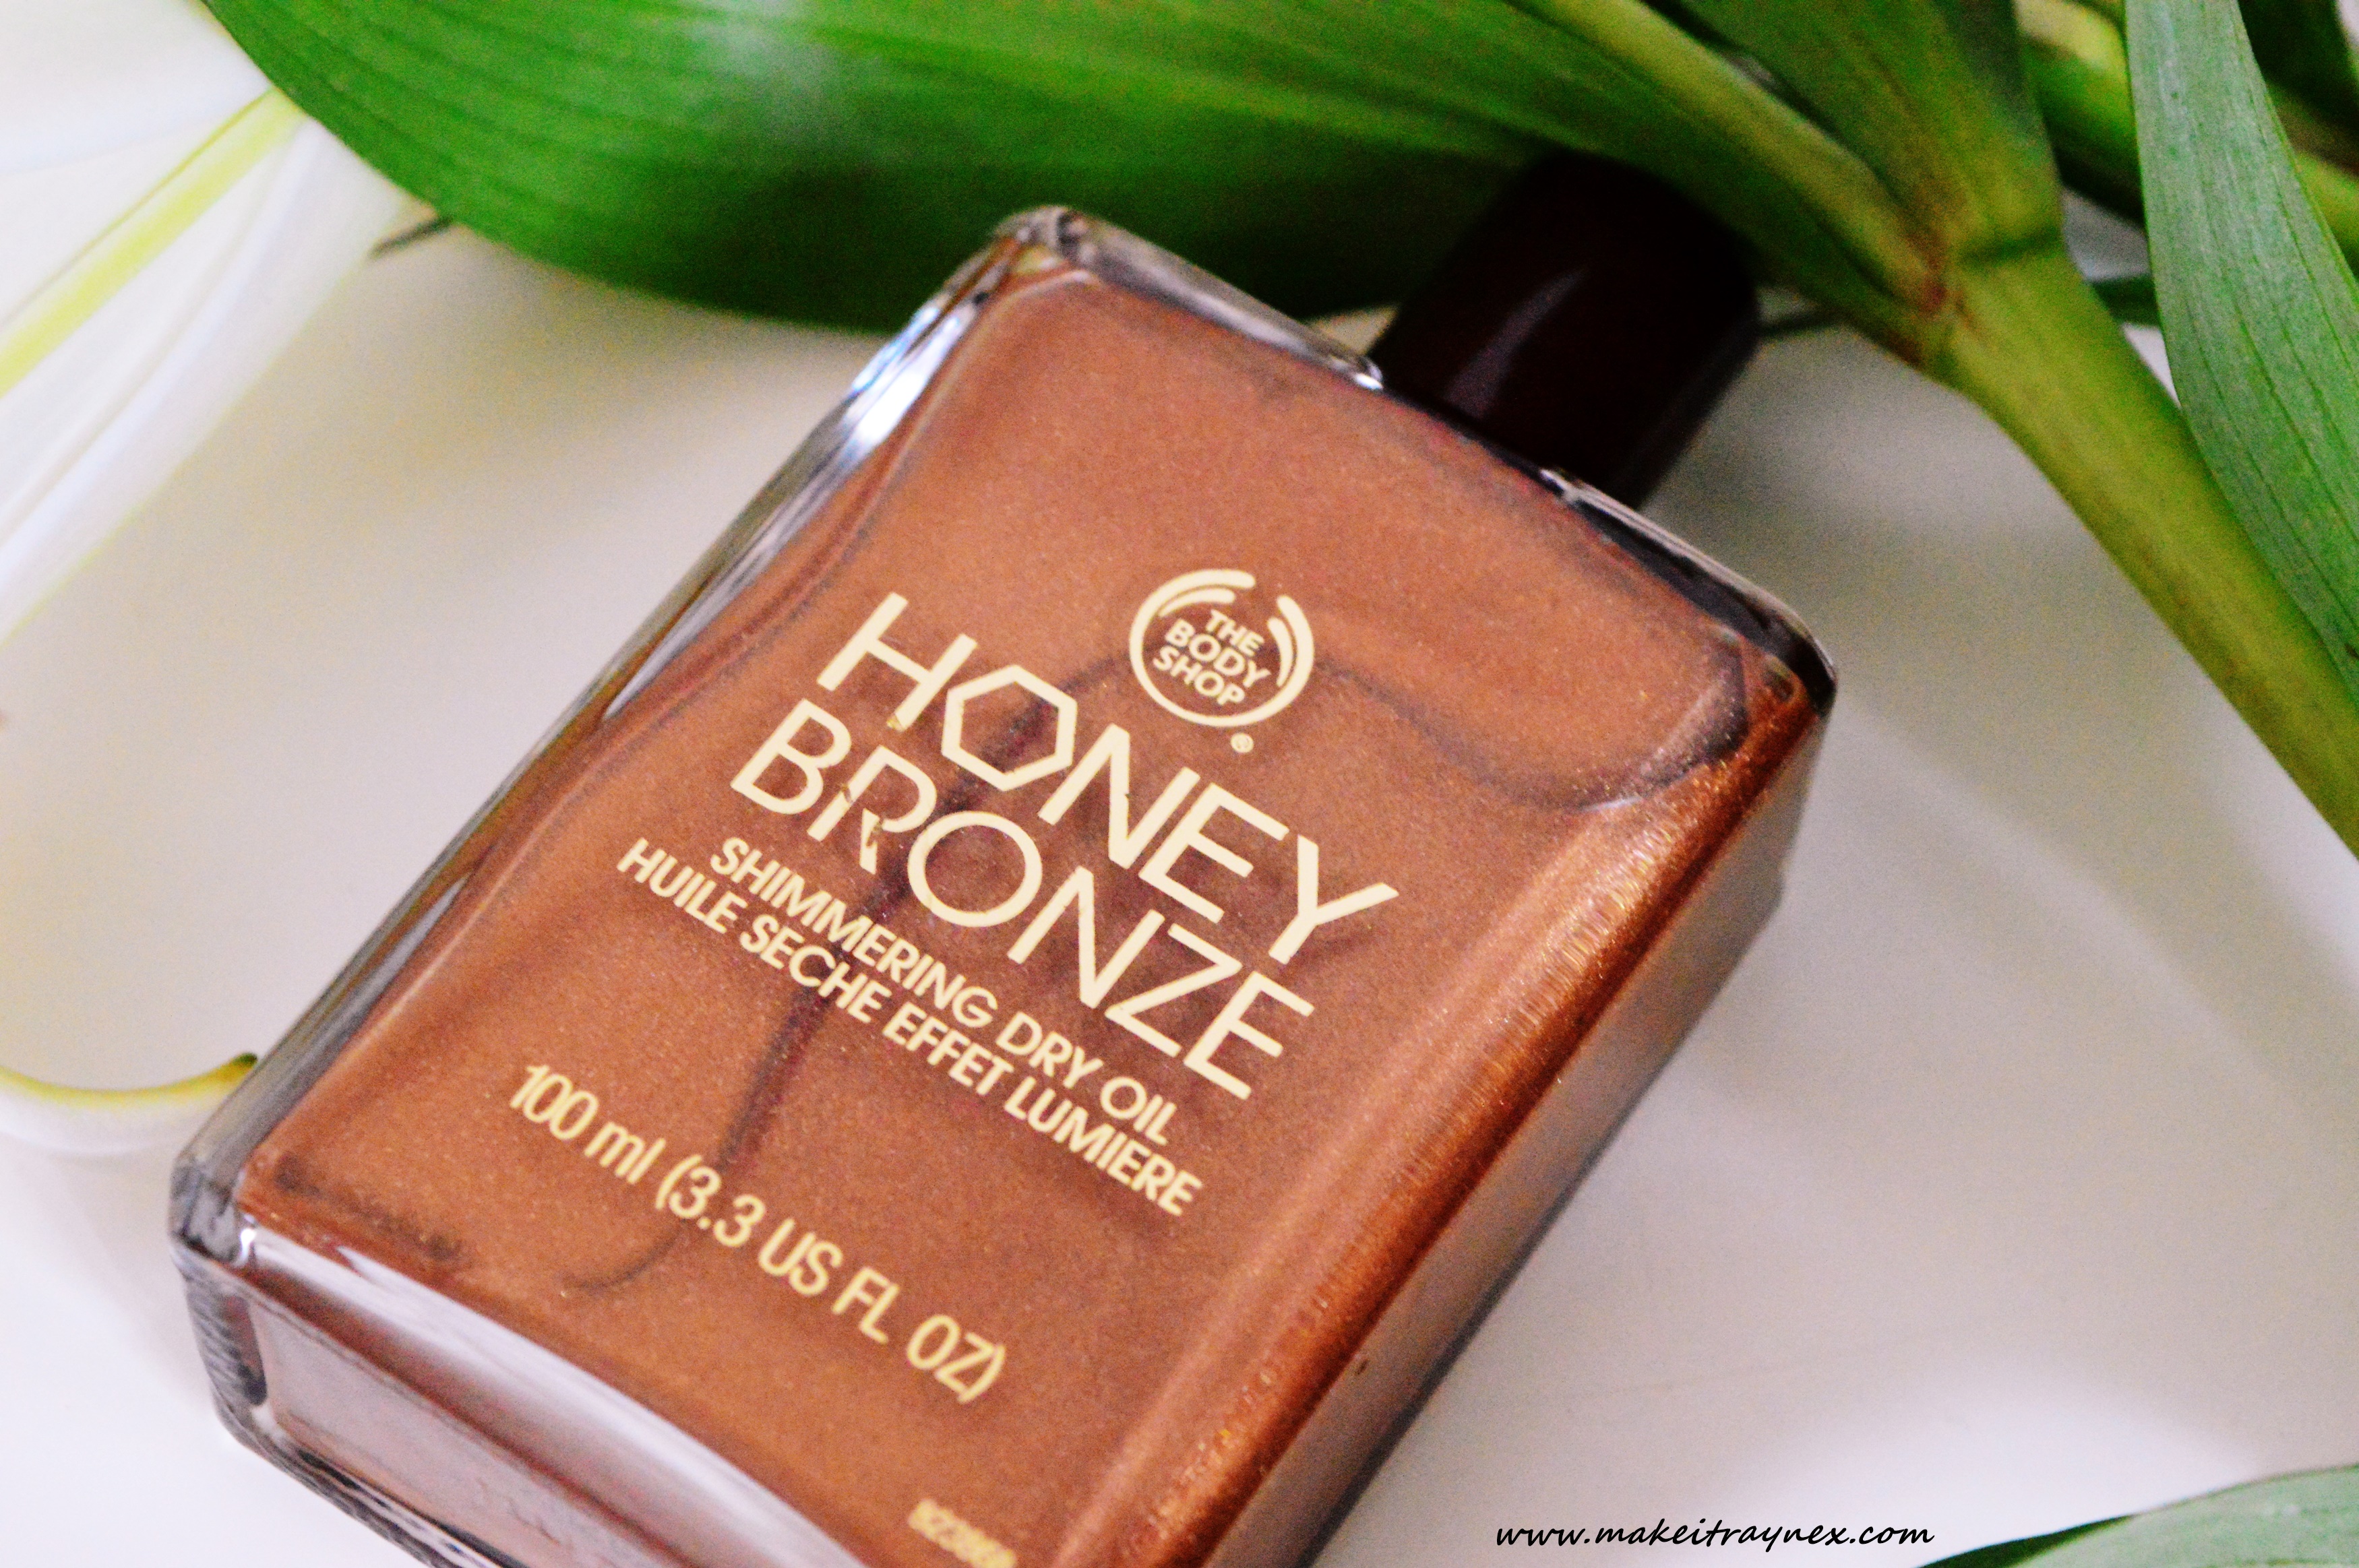 A full face make-up look for Spring using The Body Shop products {REVIEW}